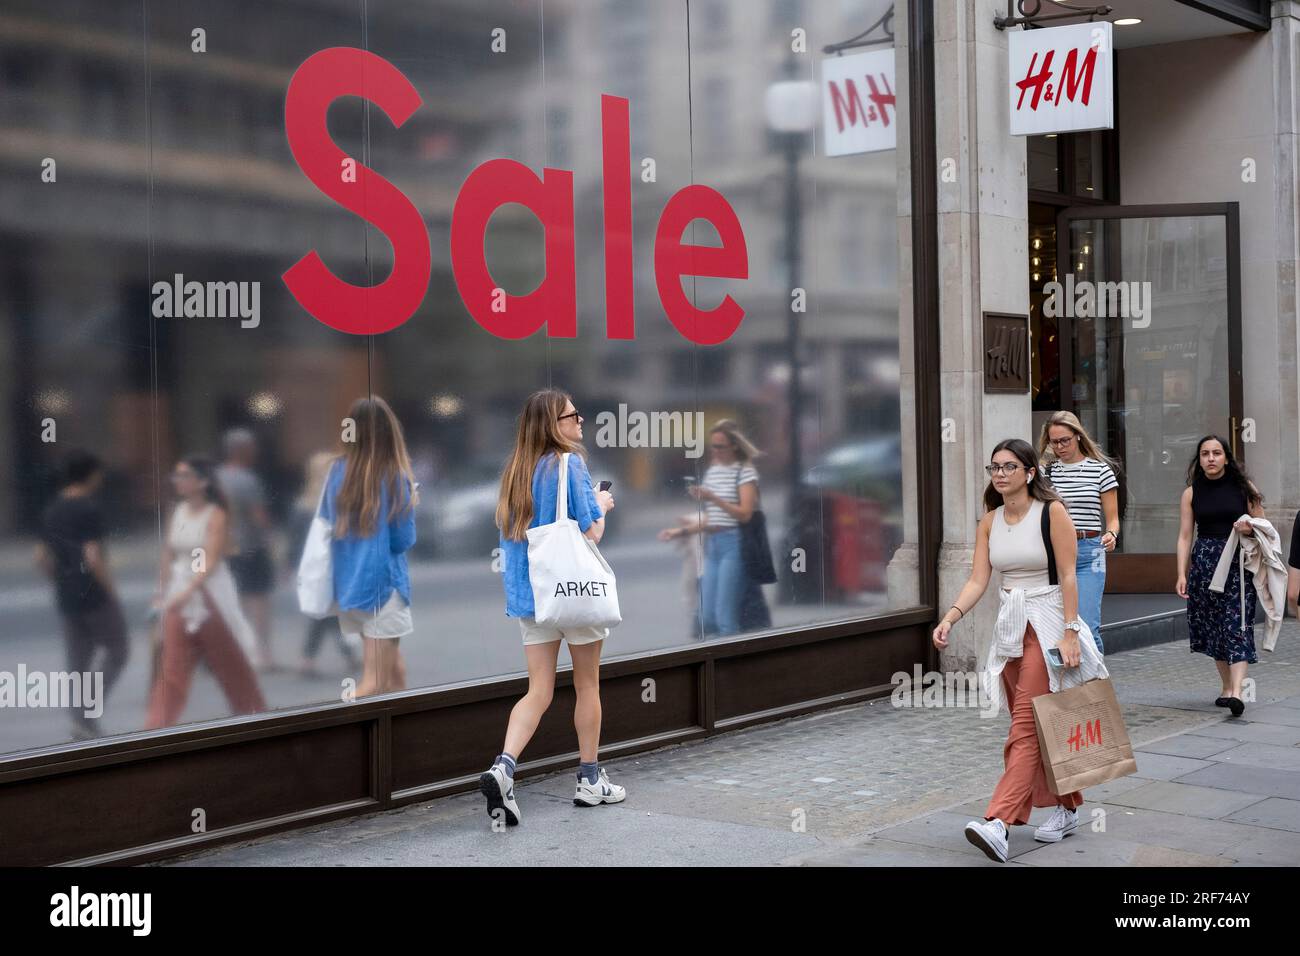 H&M - Finish off your Christmas shopping! H&M SALE UP TO 75% OFF in stores  and online id.hm.com